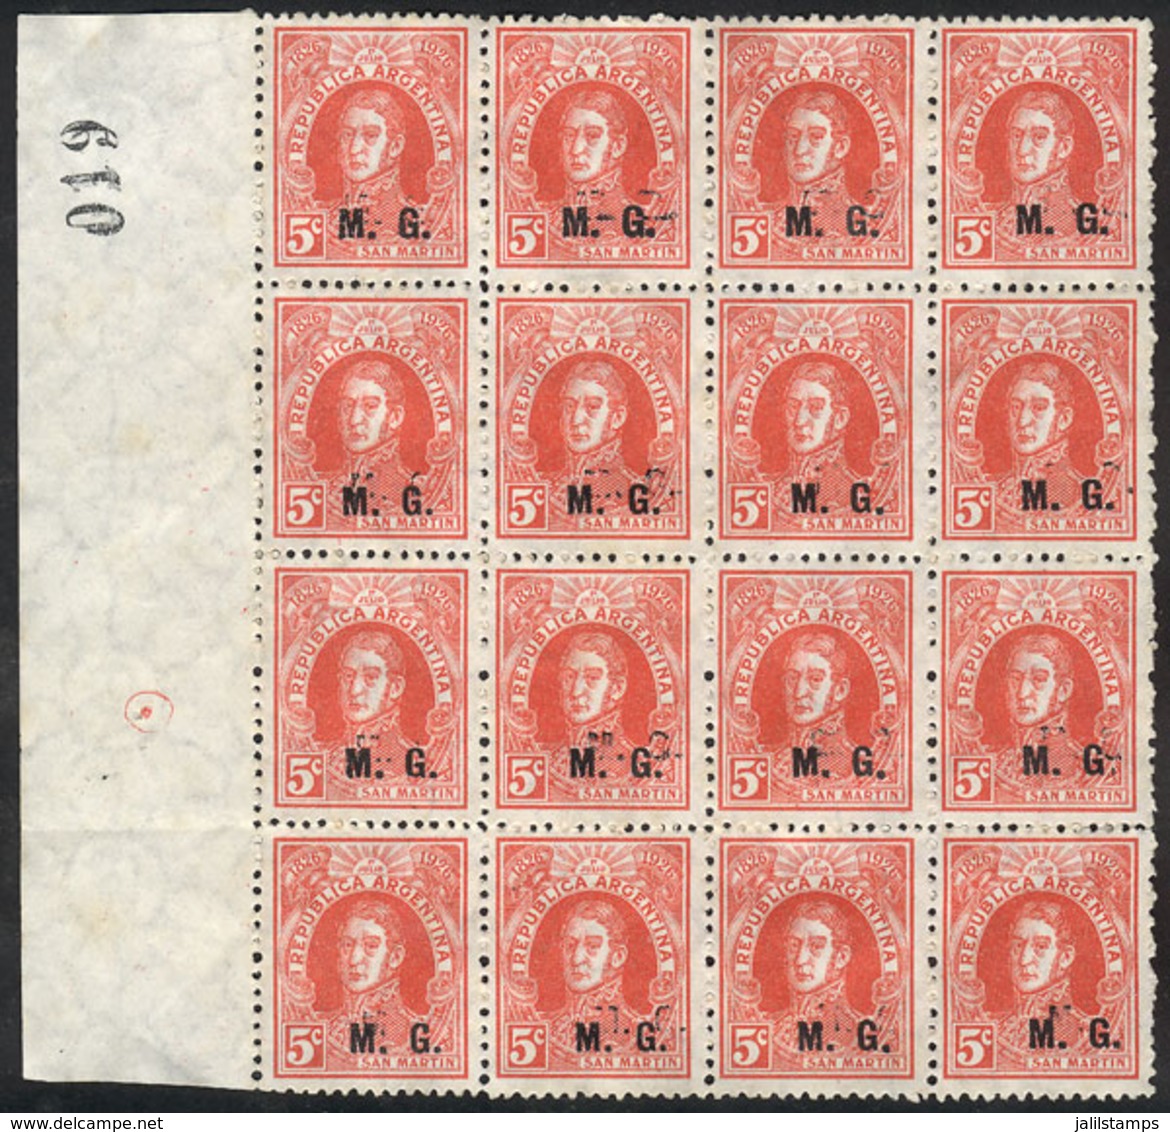 ARGENTINA: GJ.191a, With DOUBLE IMPRESSION Variety Of The Overprint (one Light), Mint Without Gum, Fine Quality, Rare! - Servizio